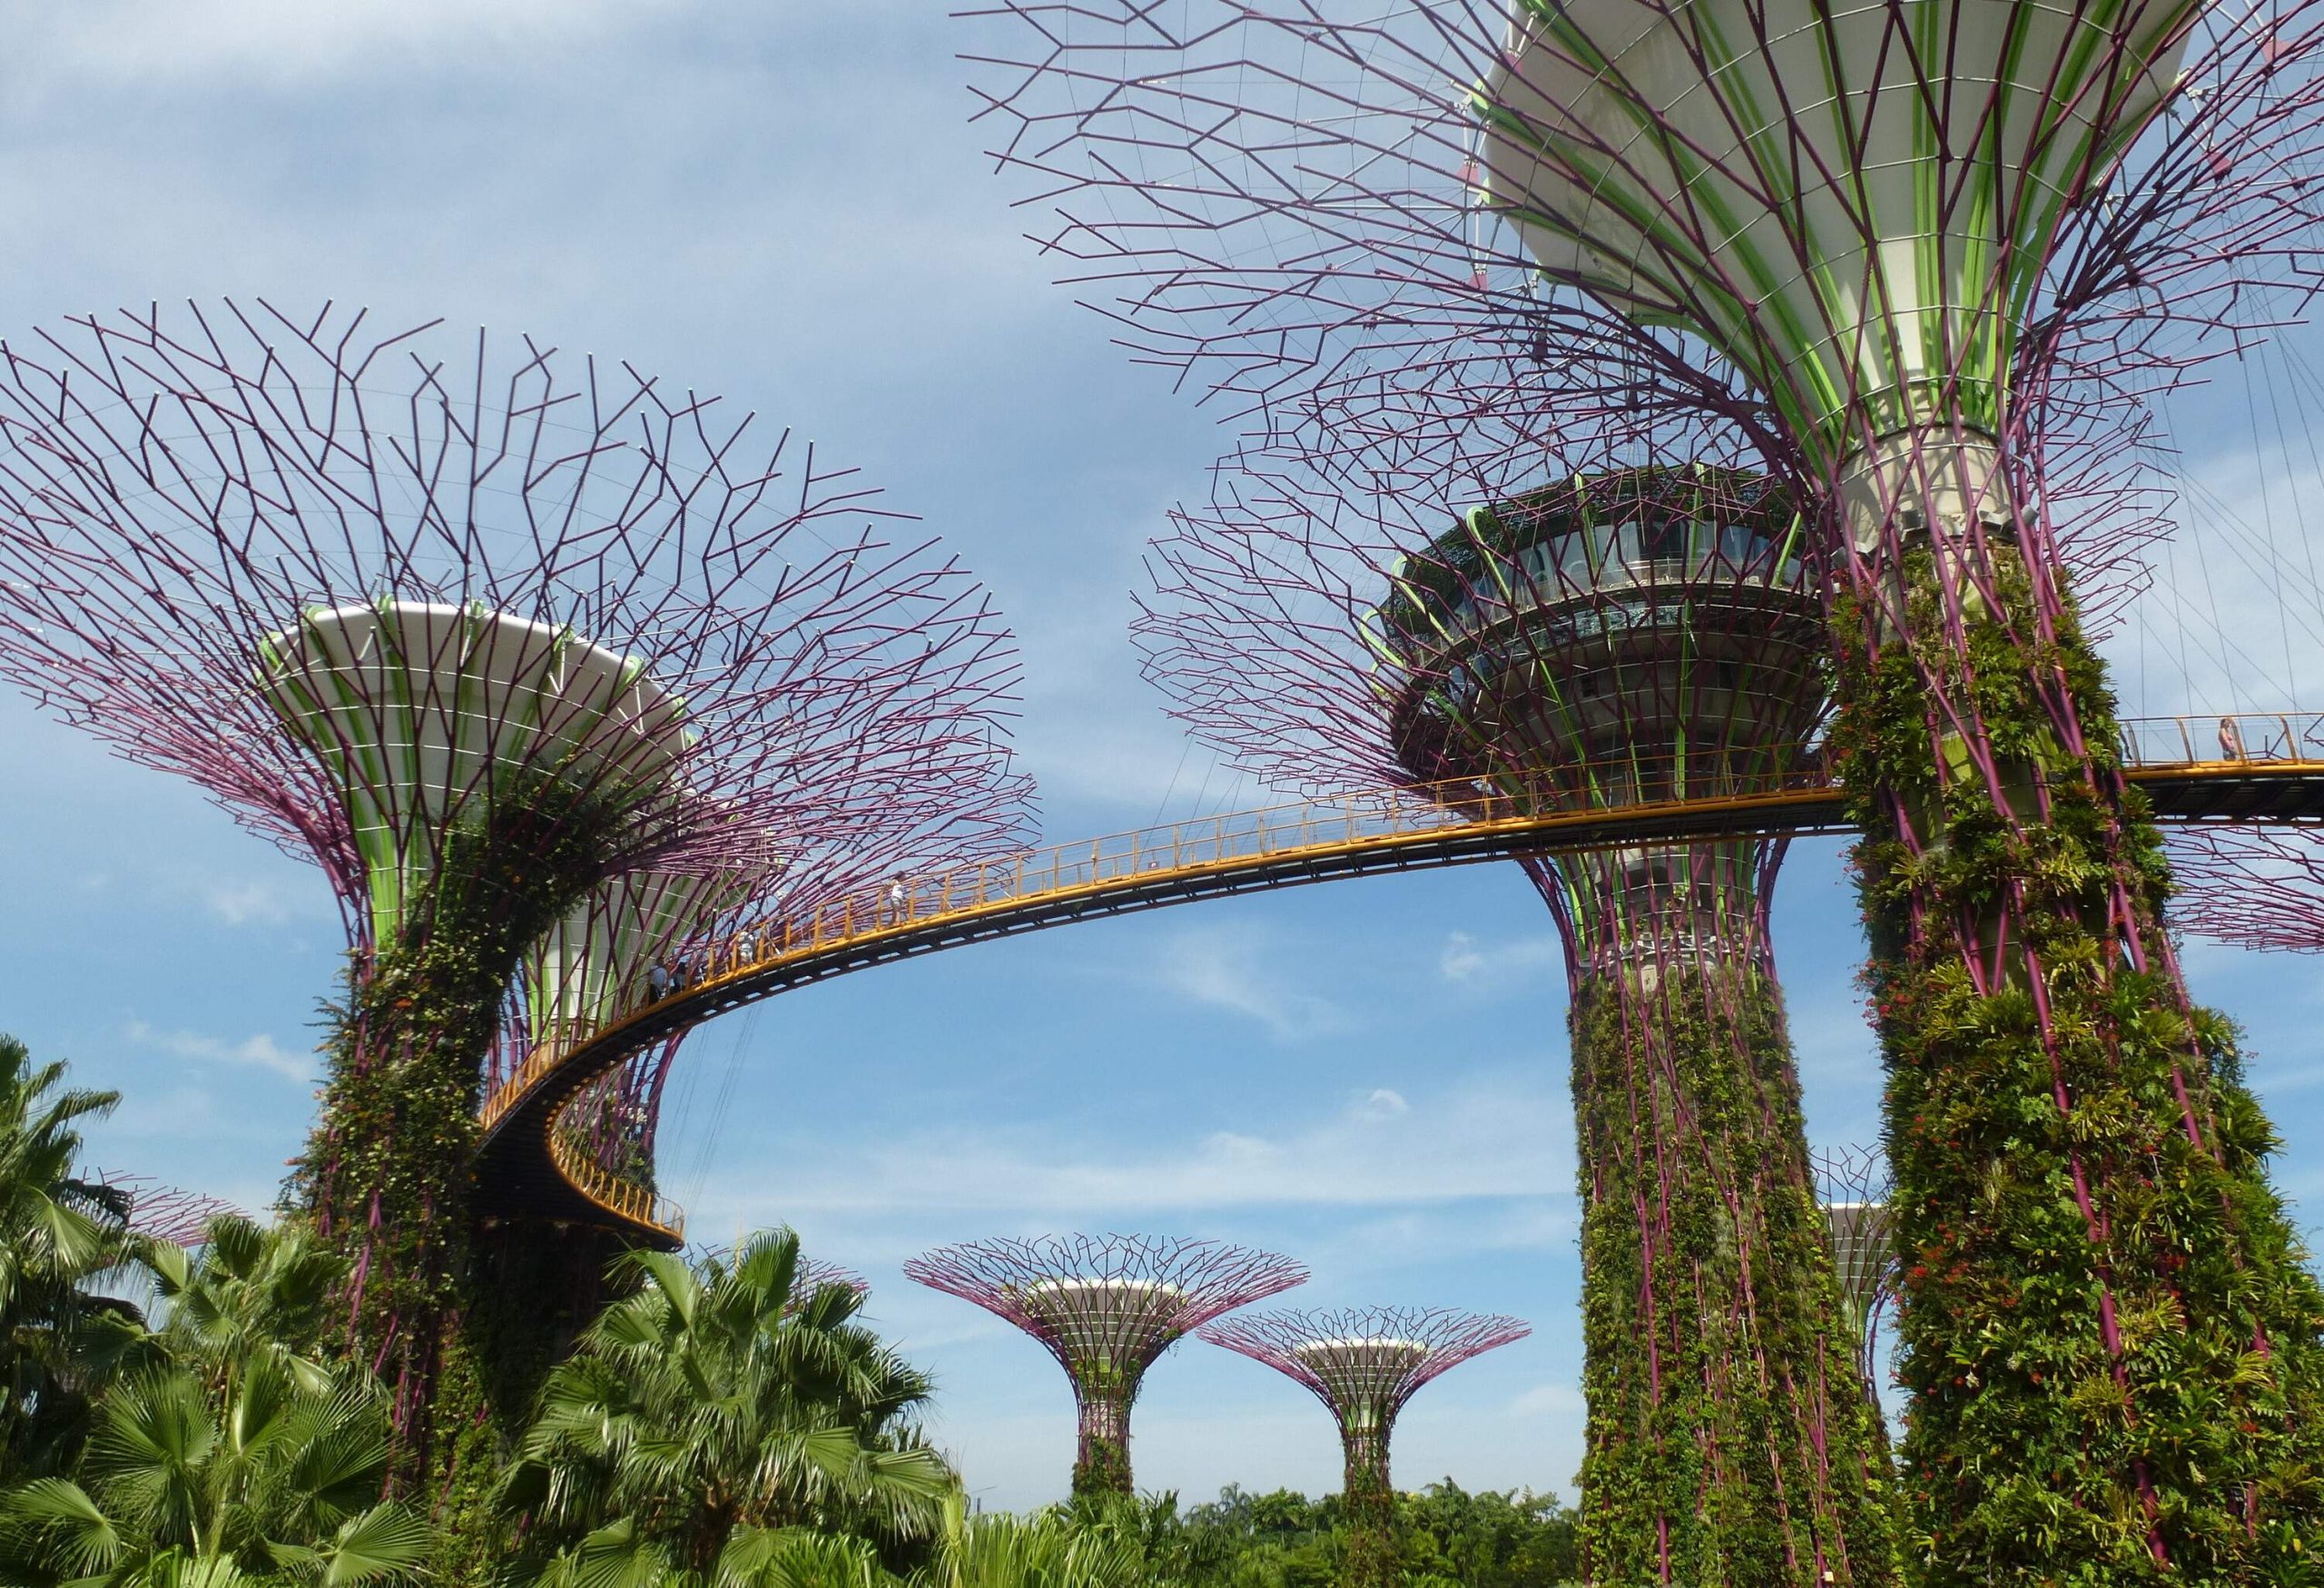 The state-of-the-art Supertree Grove in Singapore surrounded by lush greenery at the bottom.